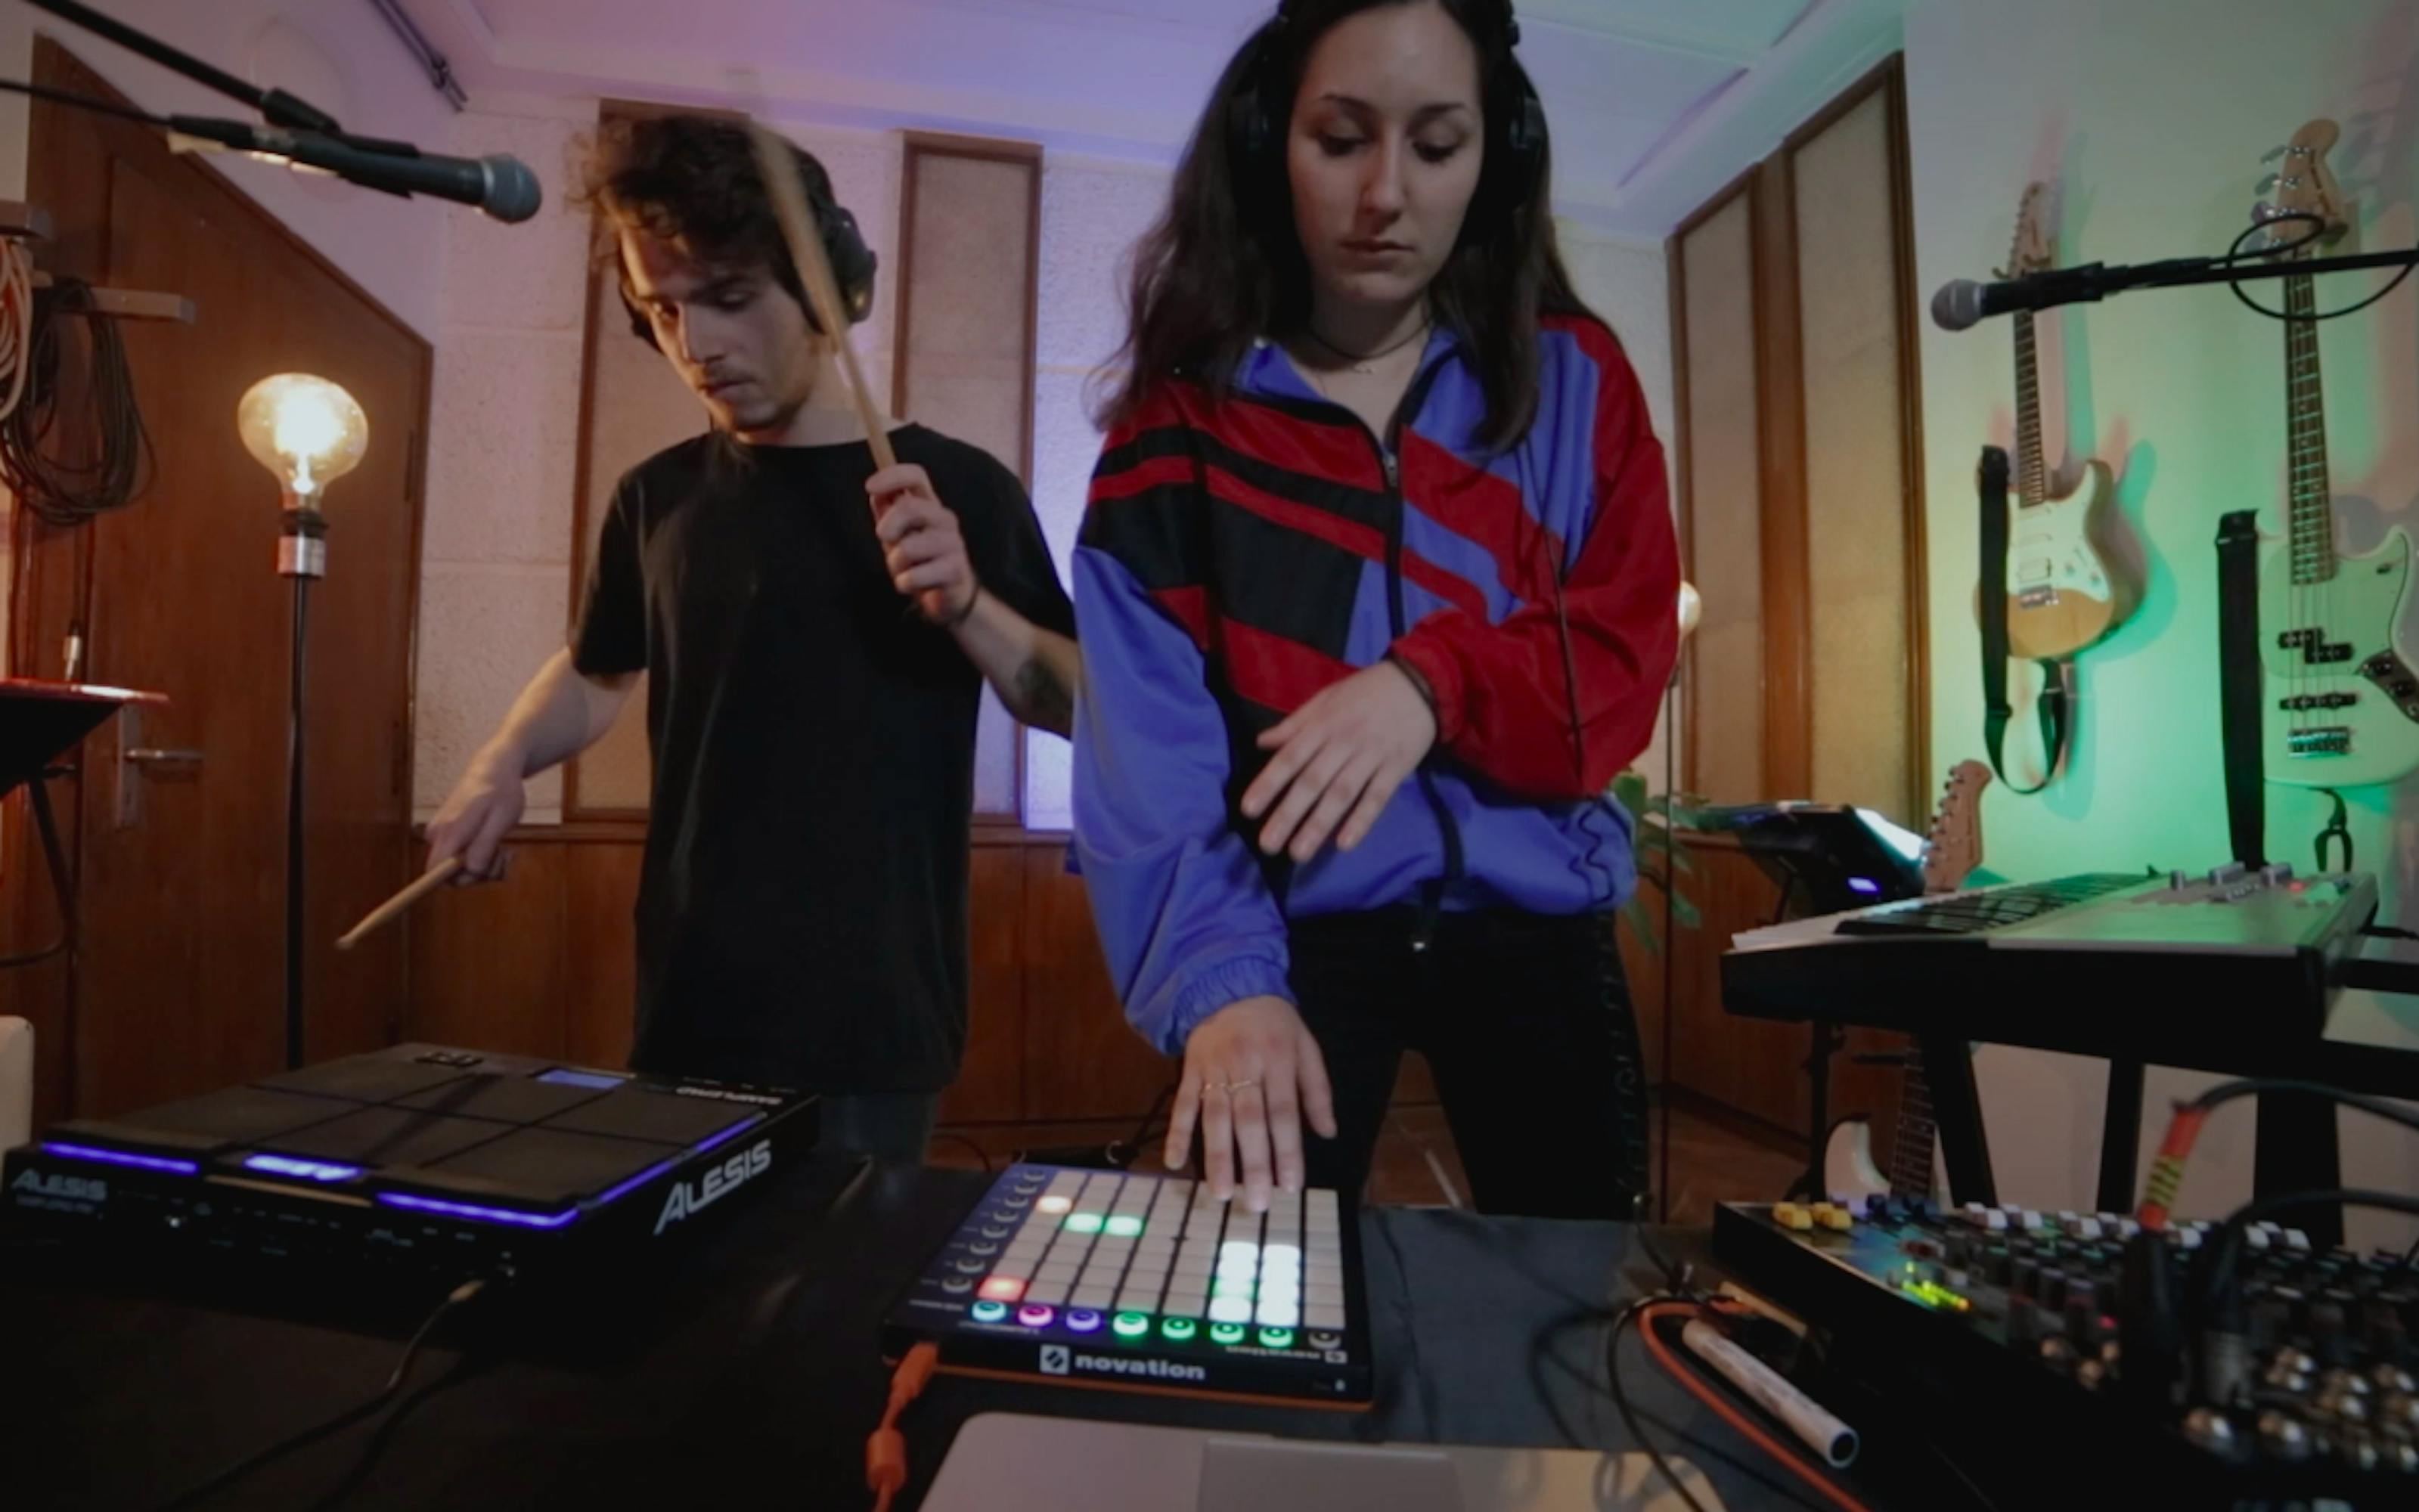 Catalyst Berlin Electronic Music Production & Performance students Garfive and Guitarbaby perform live for Studio Sessions as electronica duo Otari